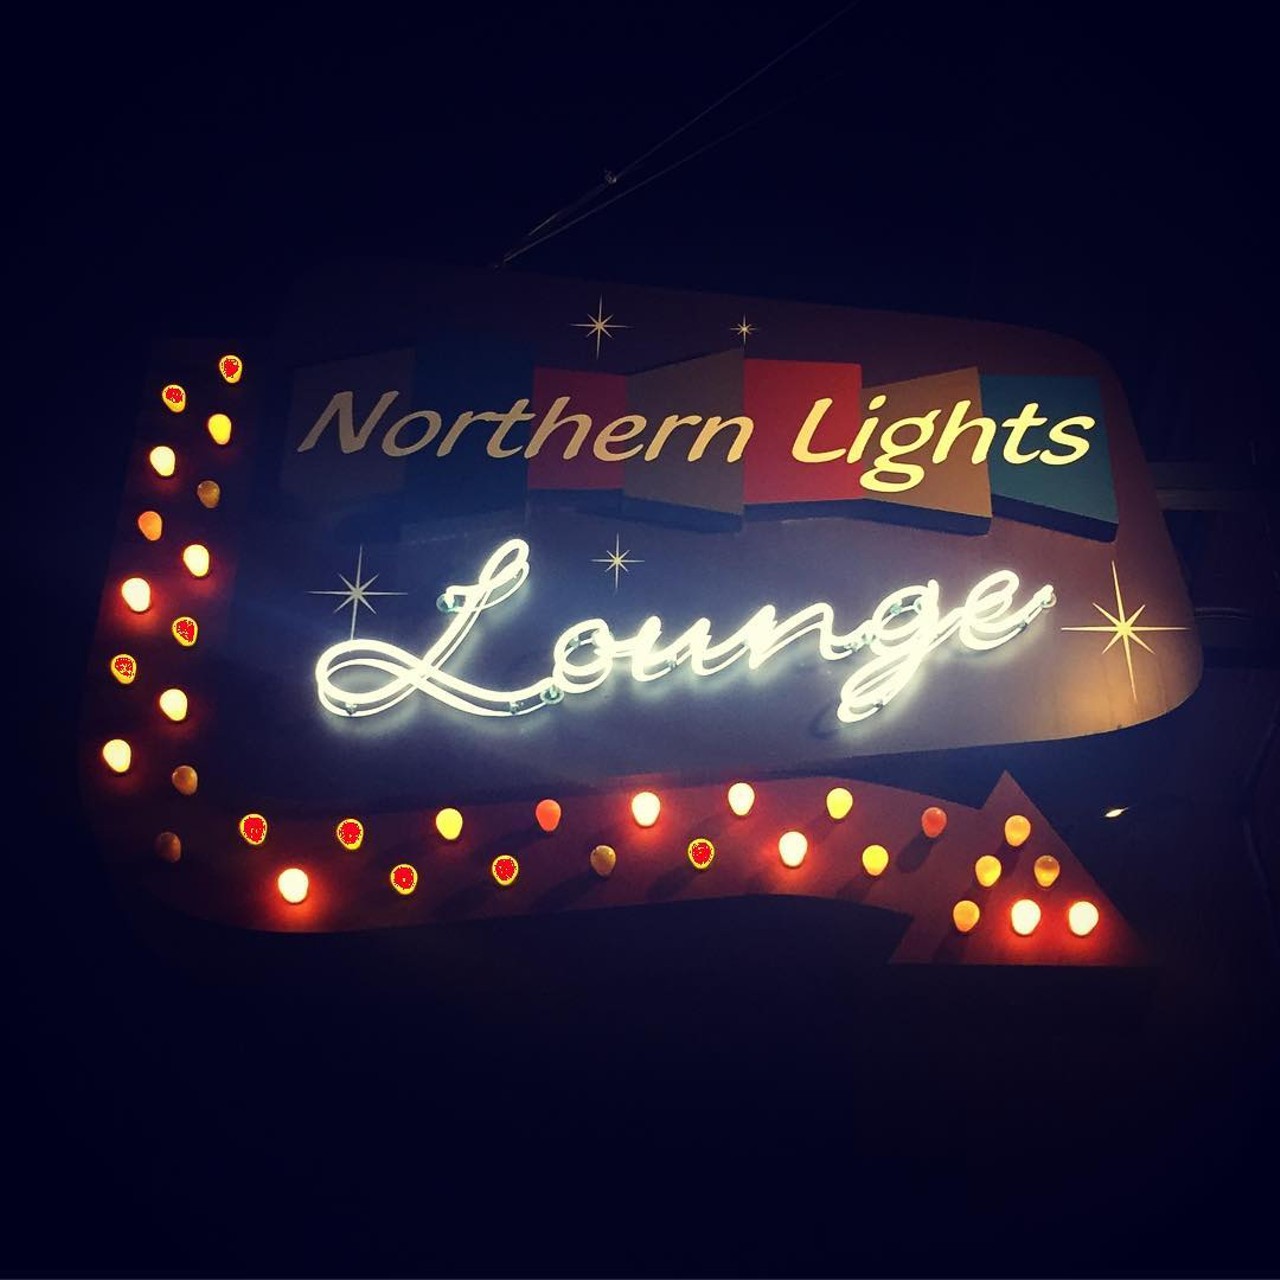 Northern Lights Lounge
660 W Baltimore St, Detroit
(313)-873-1739
With a great happy hour ($2 domestic bottles!) and an awesome outdoor patio, escape the annoying people you went to high school with at this cute little bar.
Photo via IG user @daizylibra